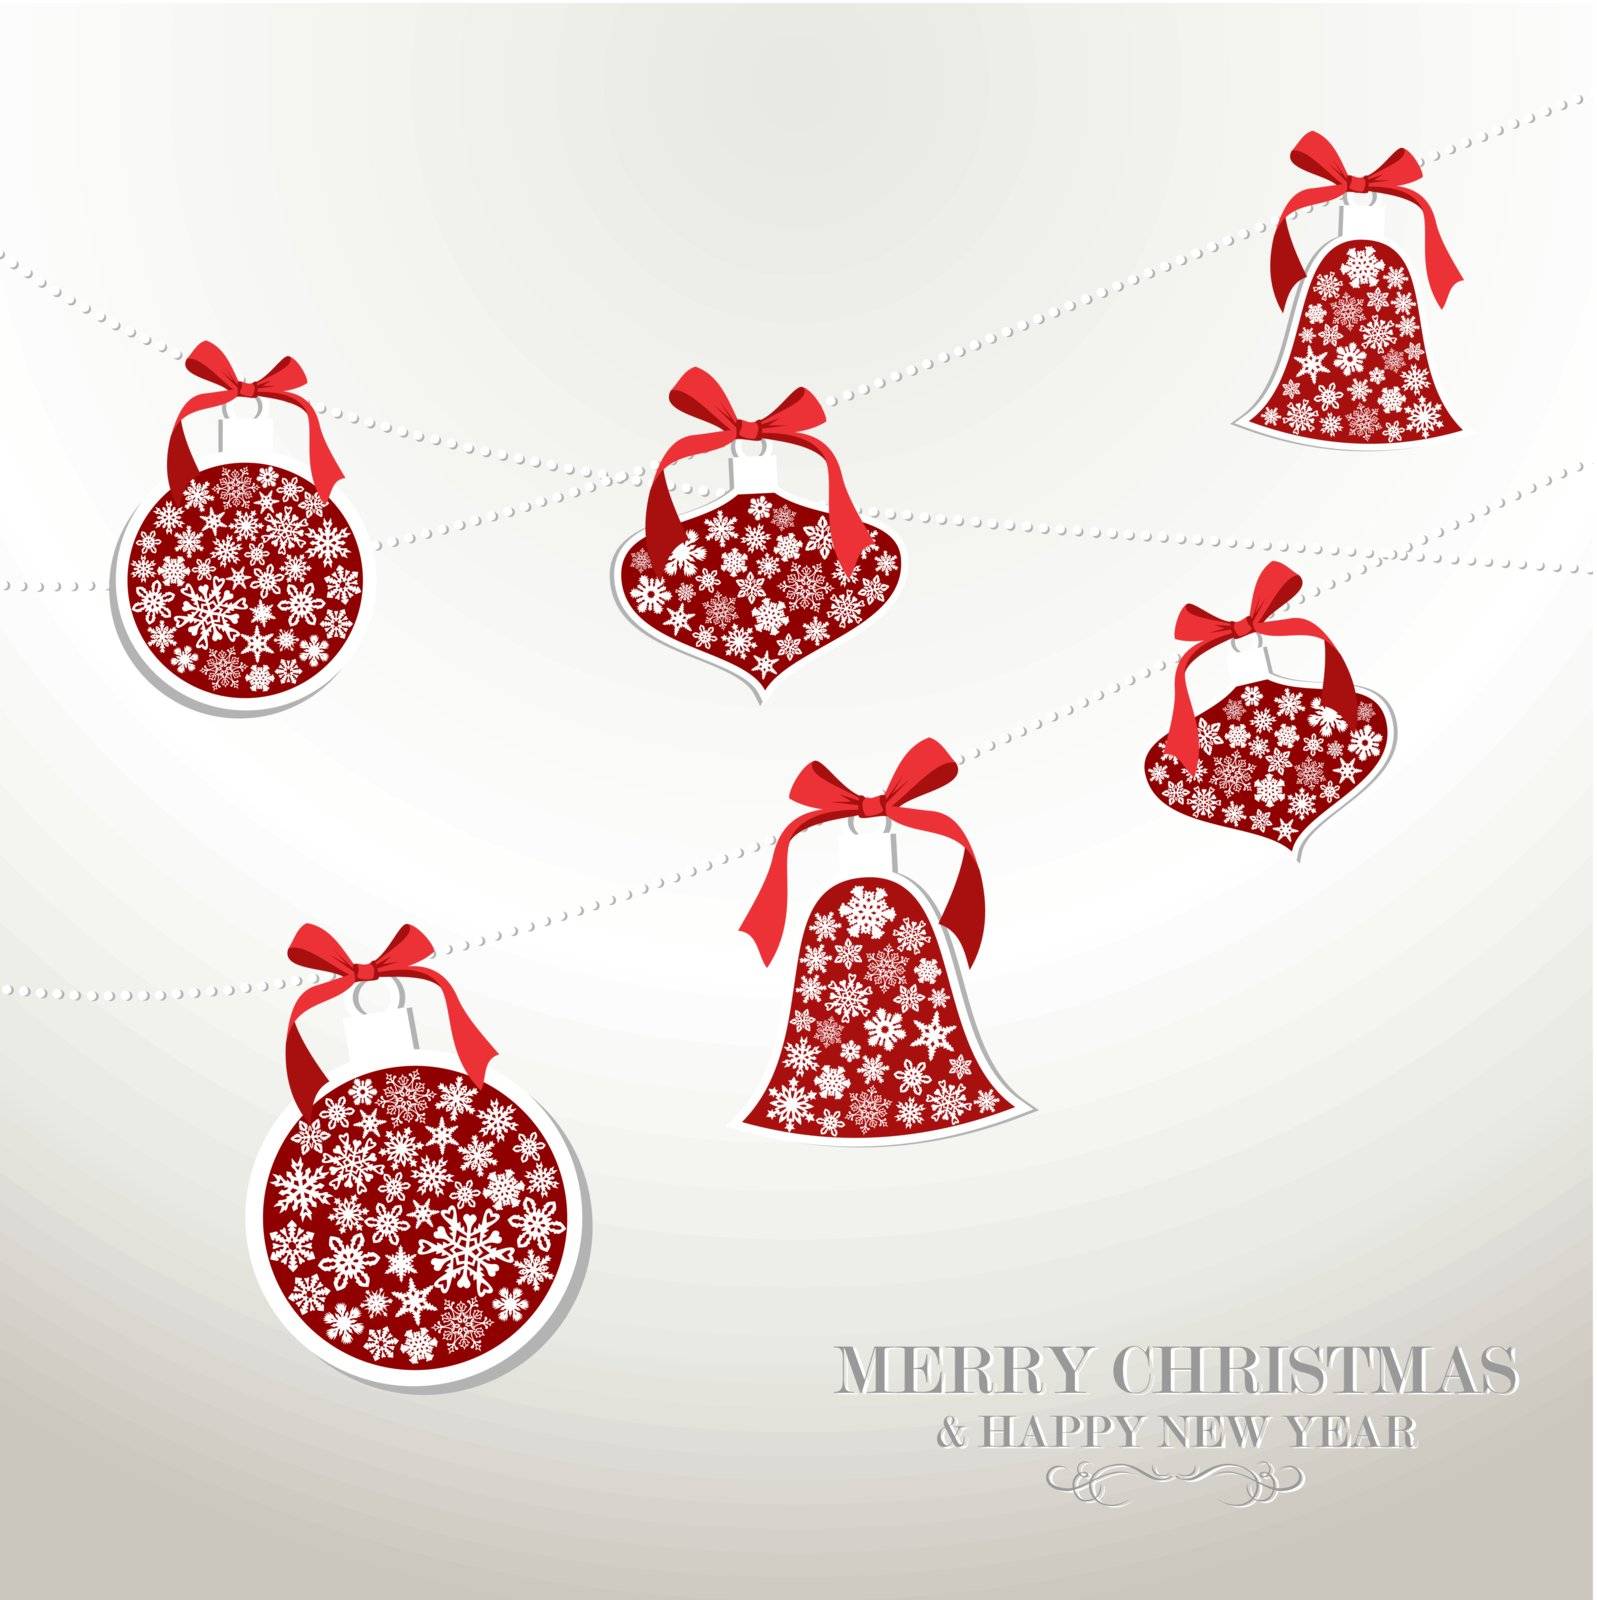 Merry Christmas and Happy new year snowflakes baubles greeting card. Vector illustration layered for easy manipulation and custom coloring.